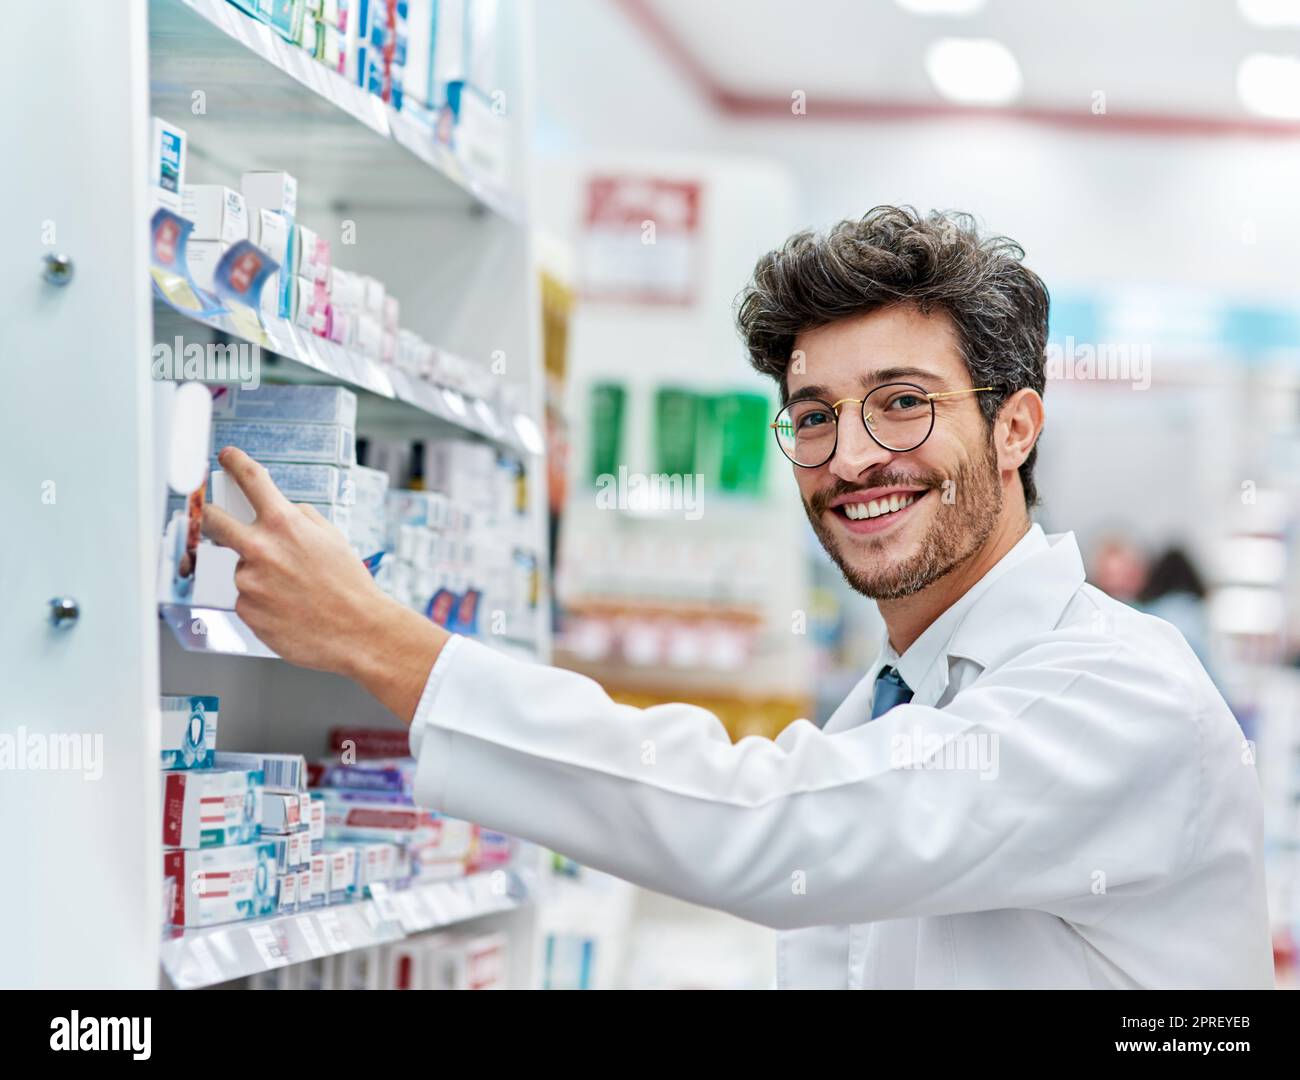 Keeping his shelves well-stocked. Portrait of a pharmacist working in a pharmacy. Stock Photo